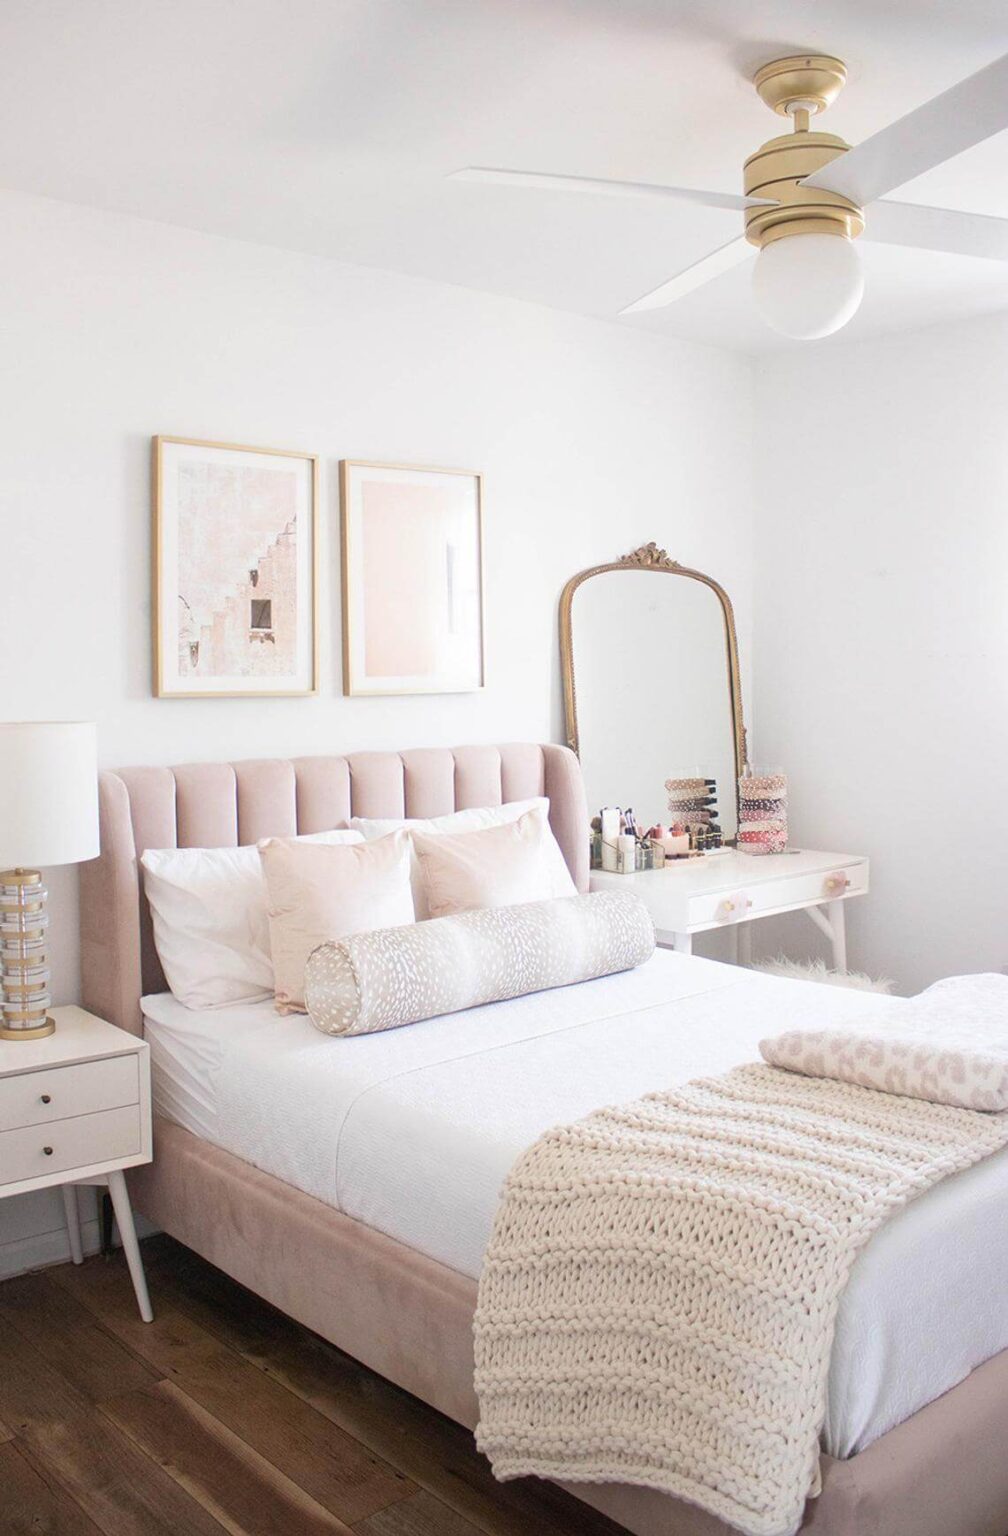 58 Small Bedroom Ideas to Maximize Your Space